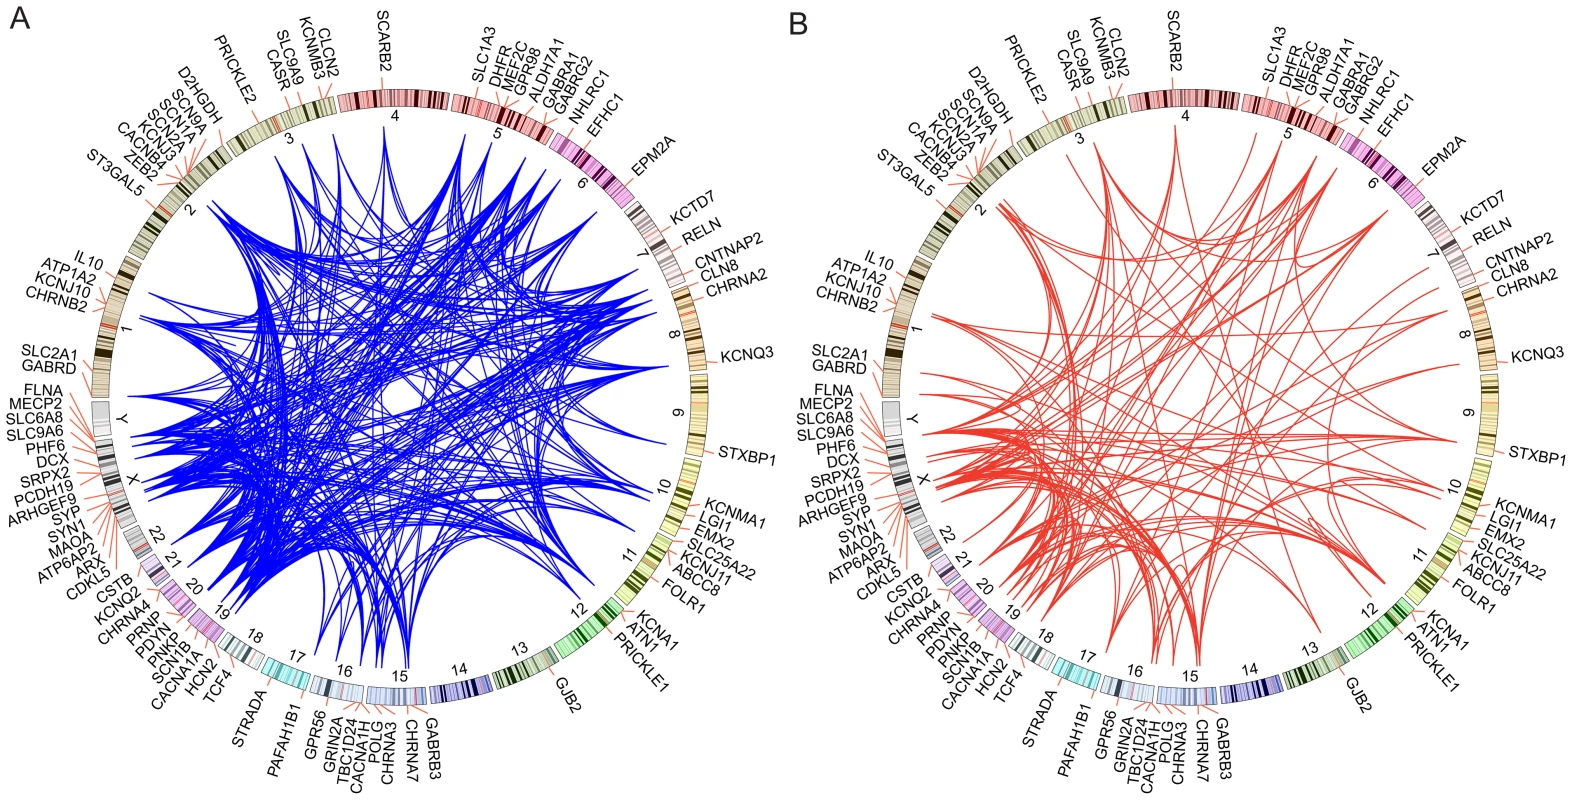 Network analysis of genes associated with epilepsy.